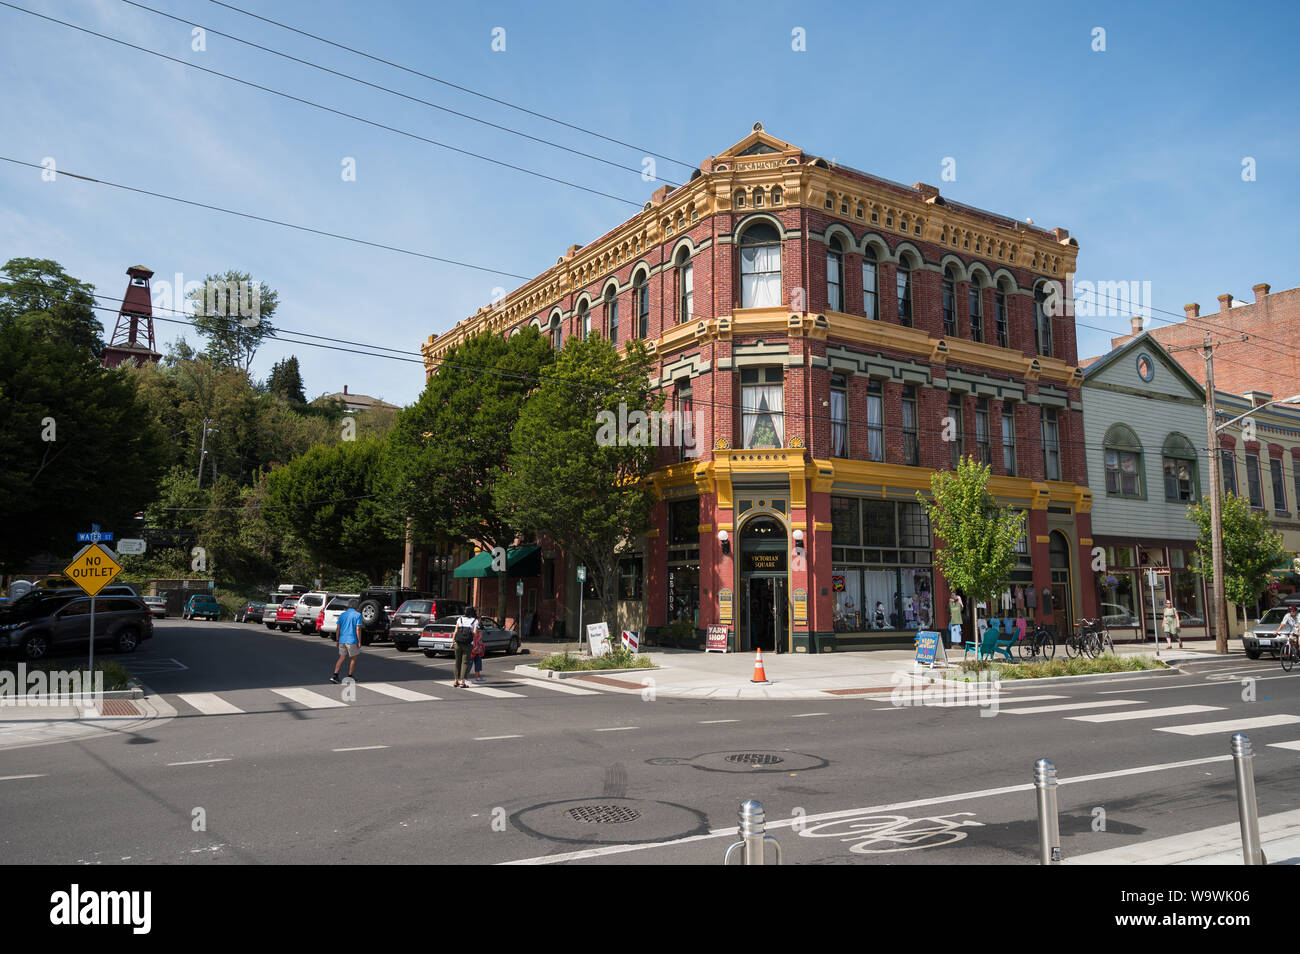 Victorian era buildings in the Olympic Peninsula area town of Port Townsend.  Washington State, USA. Stock Photo